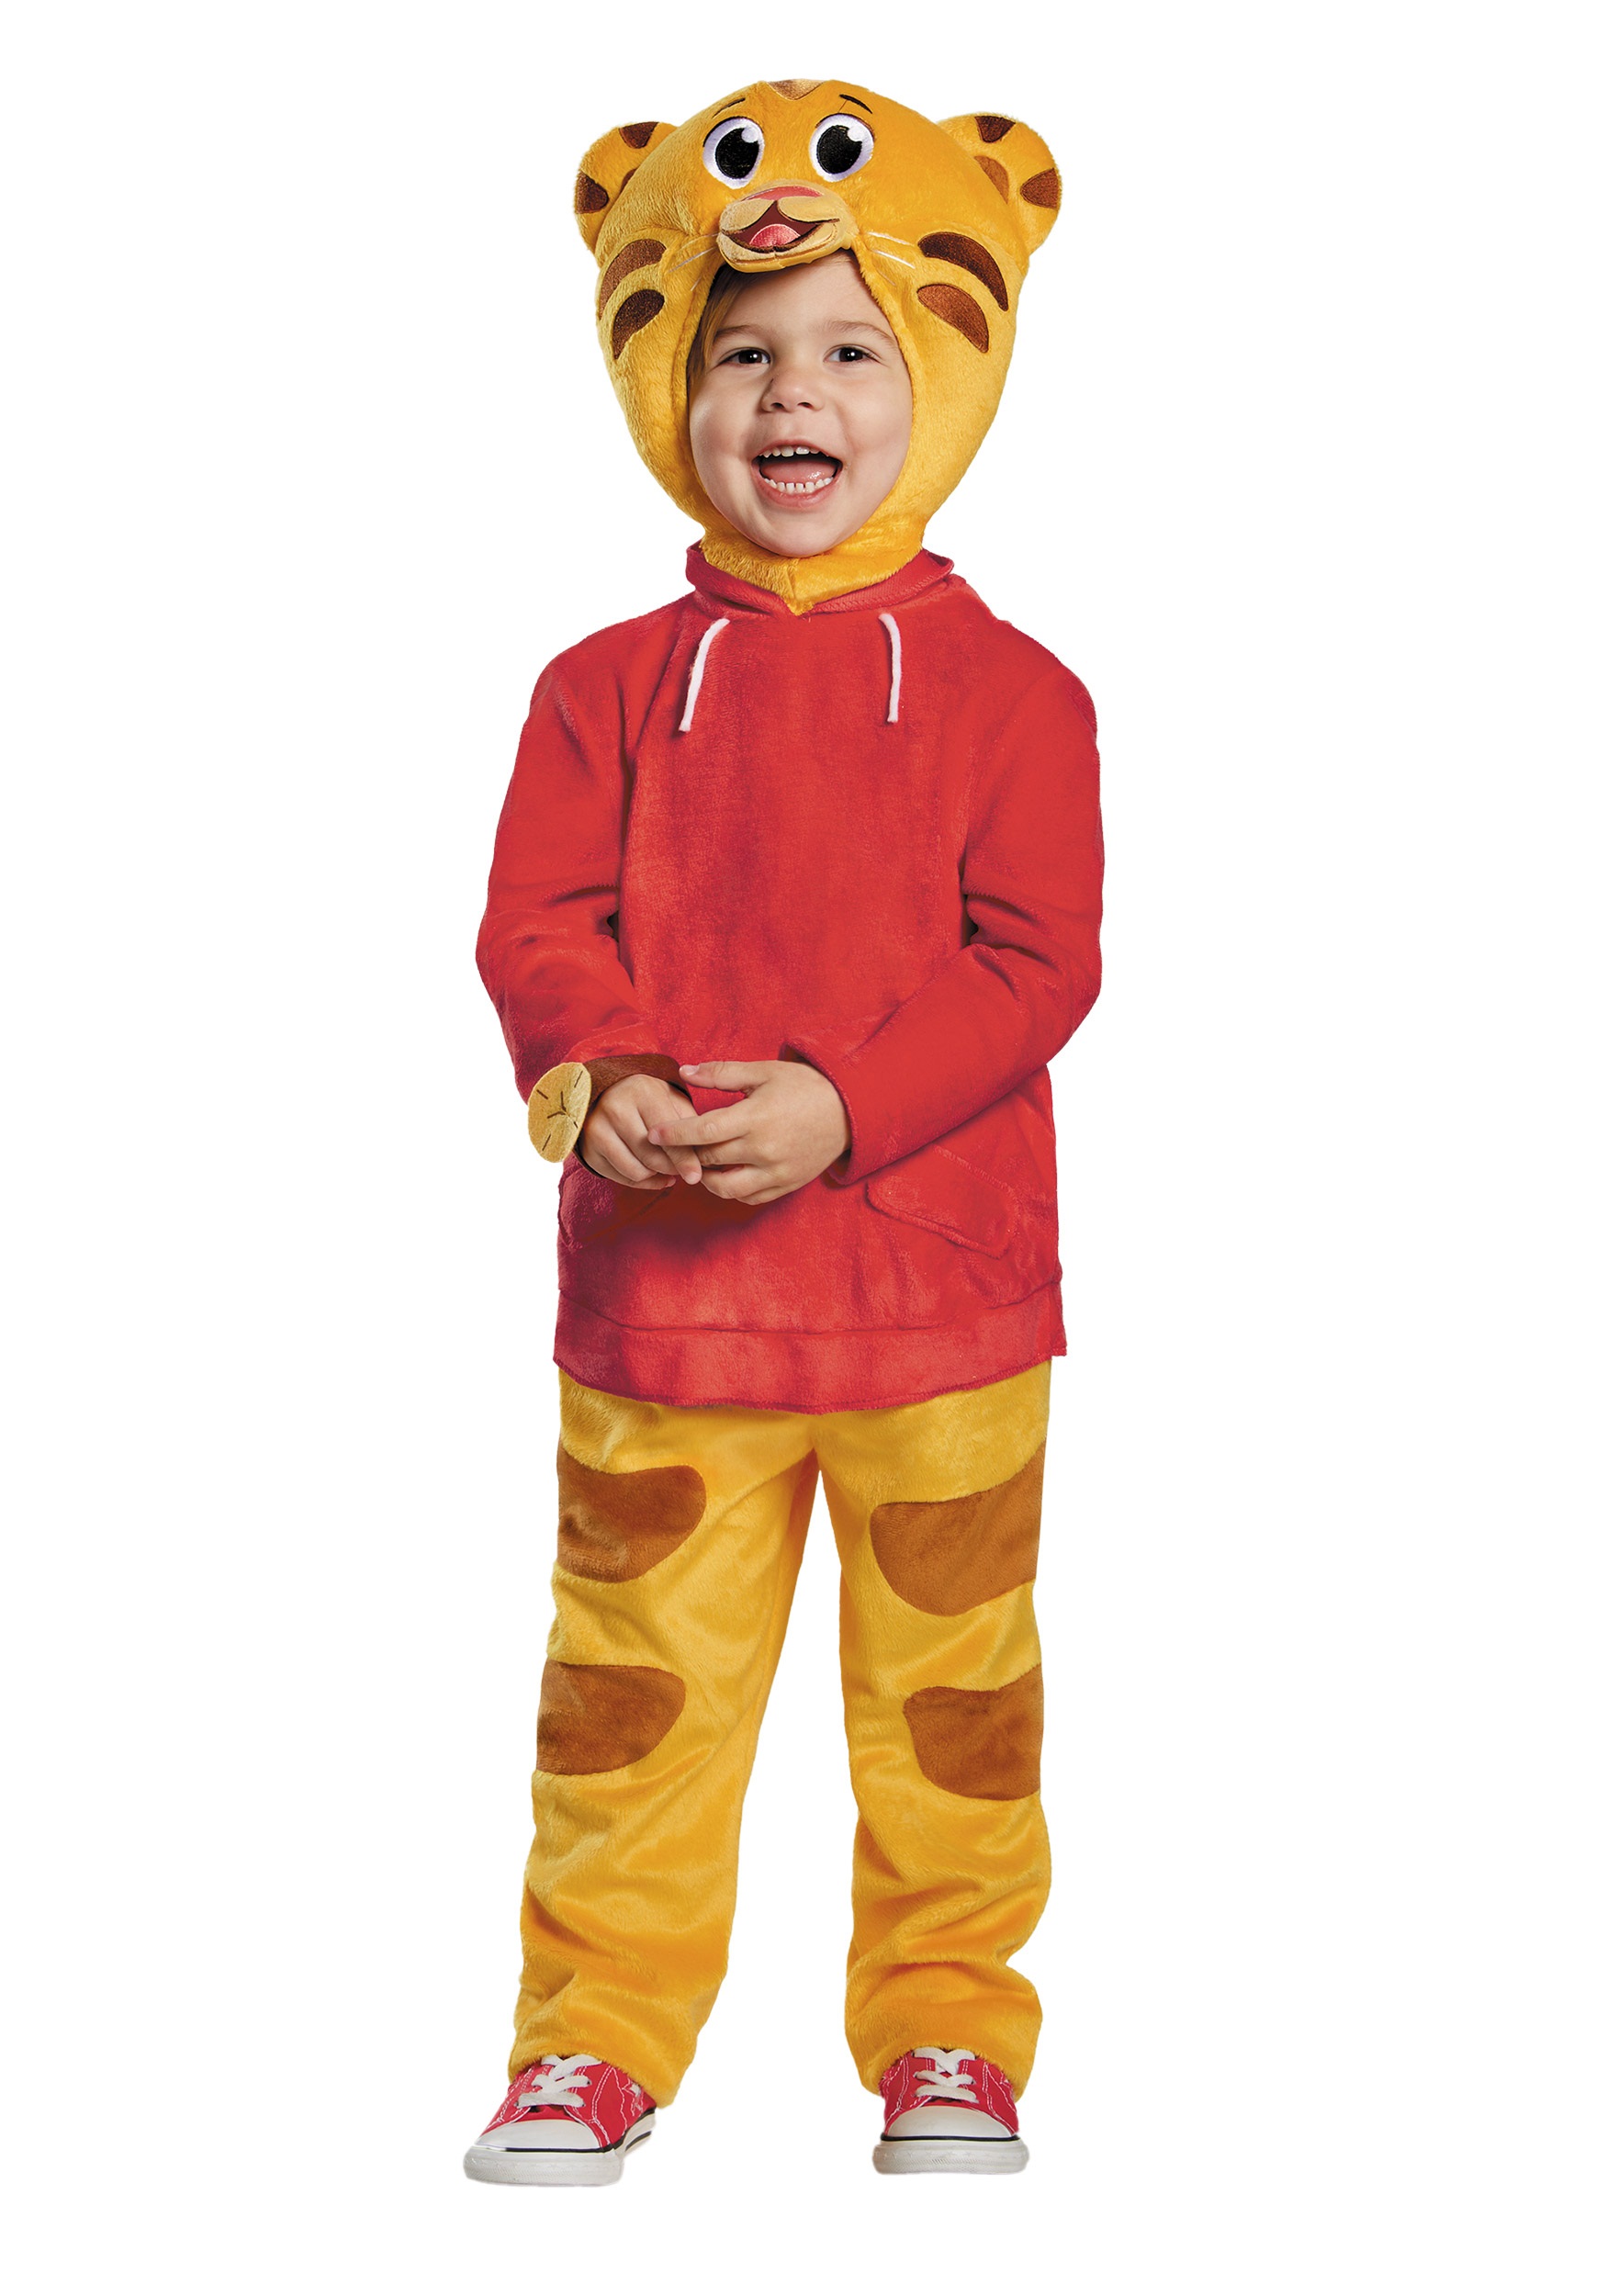 Photos - Fancy Dress Daniel Disguise  Tiger Deluxe Costume for Toddlers Orange/Red DI72596 